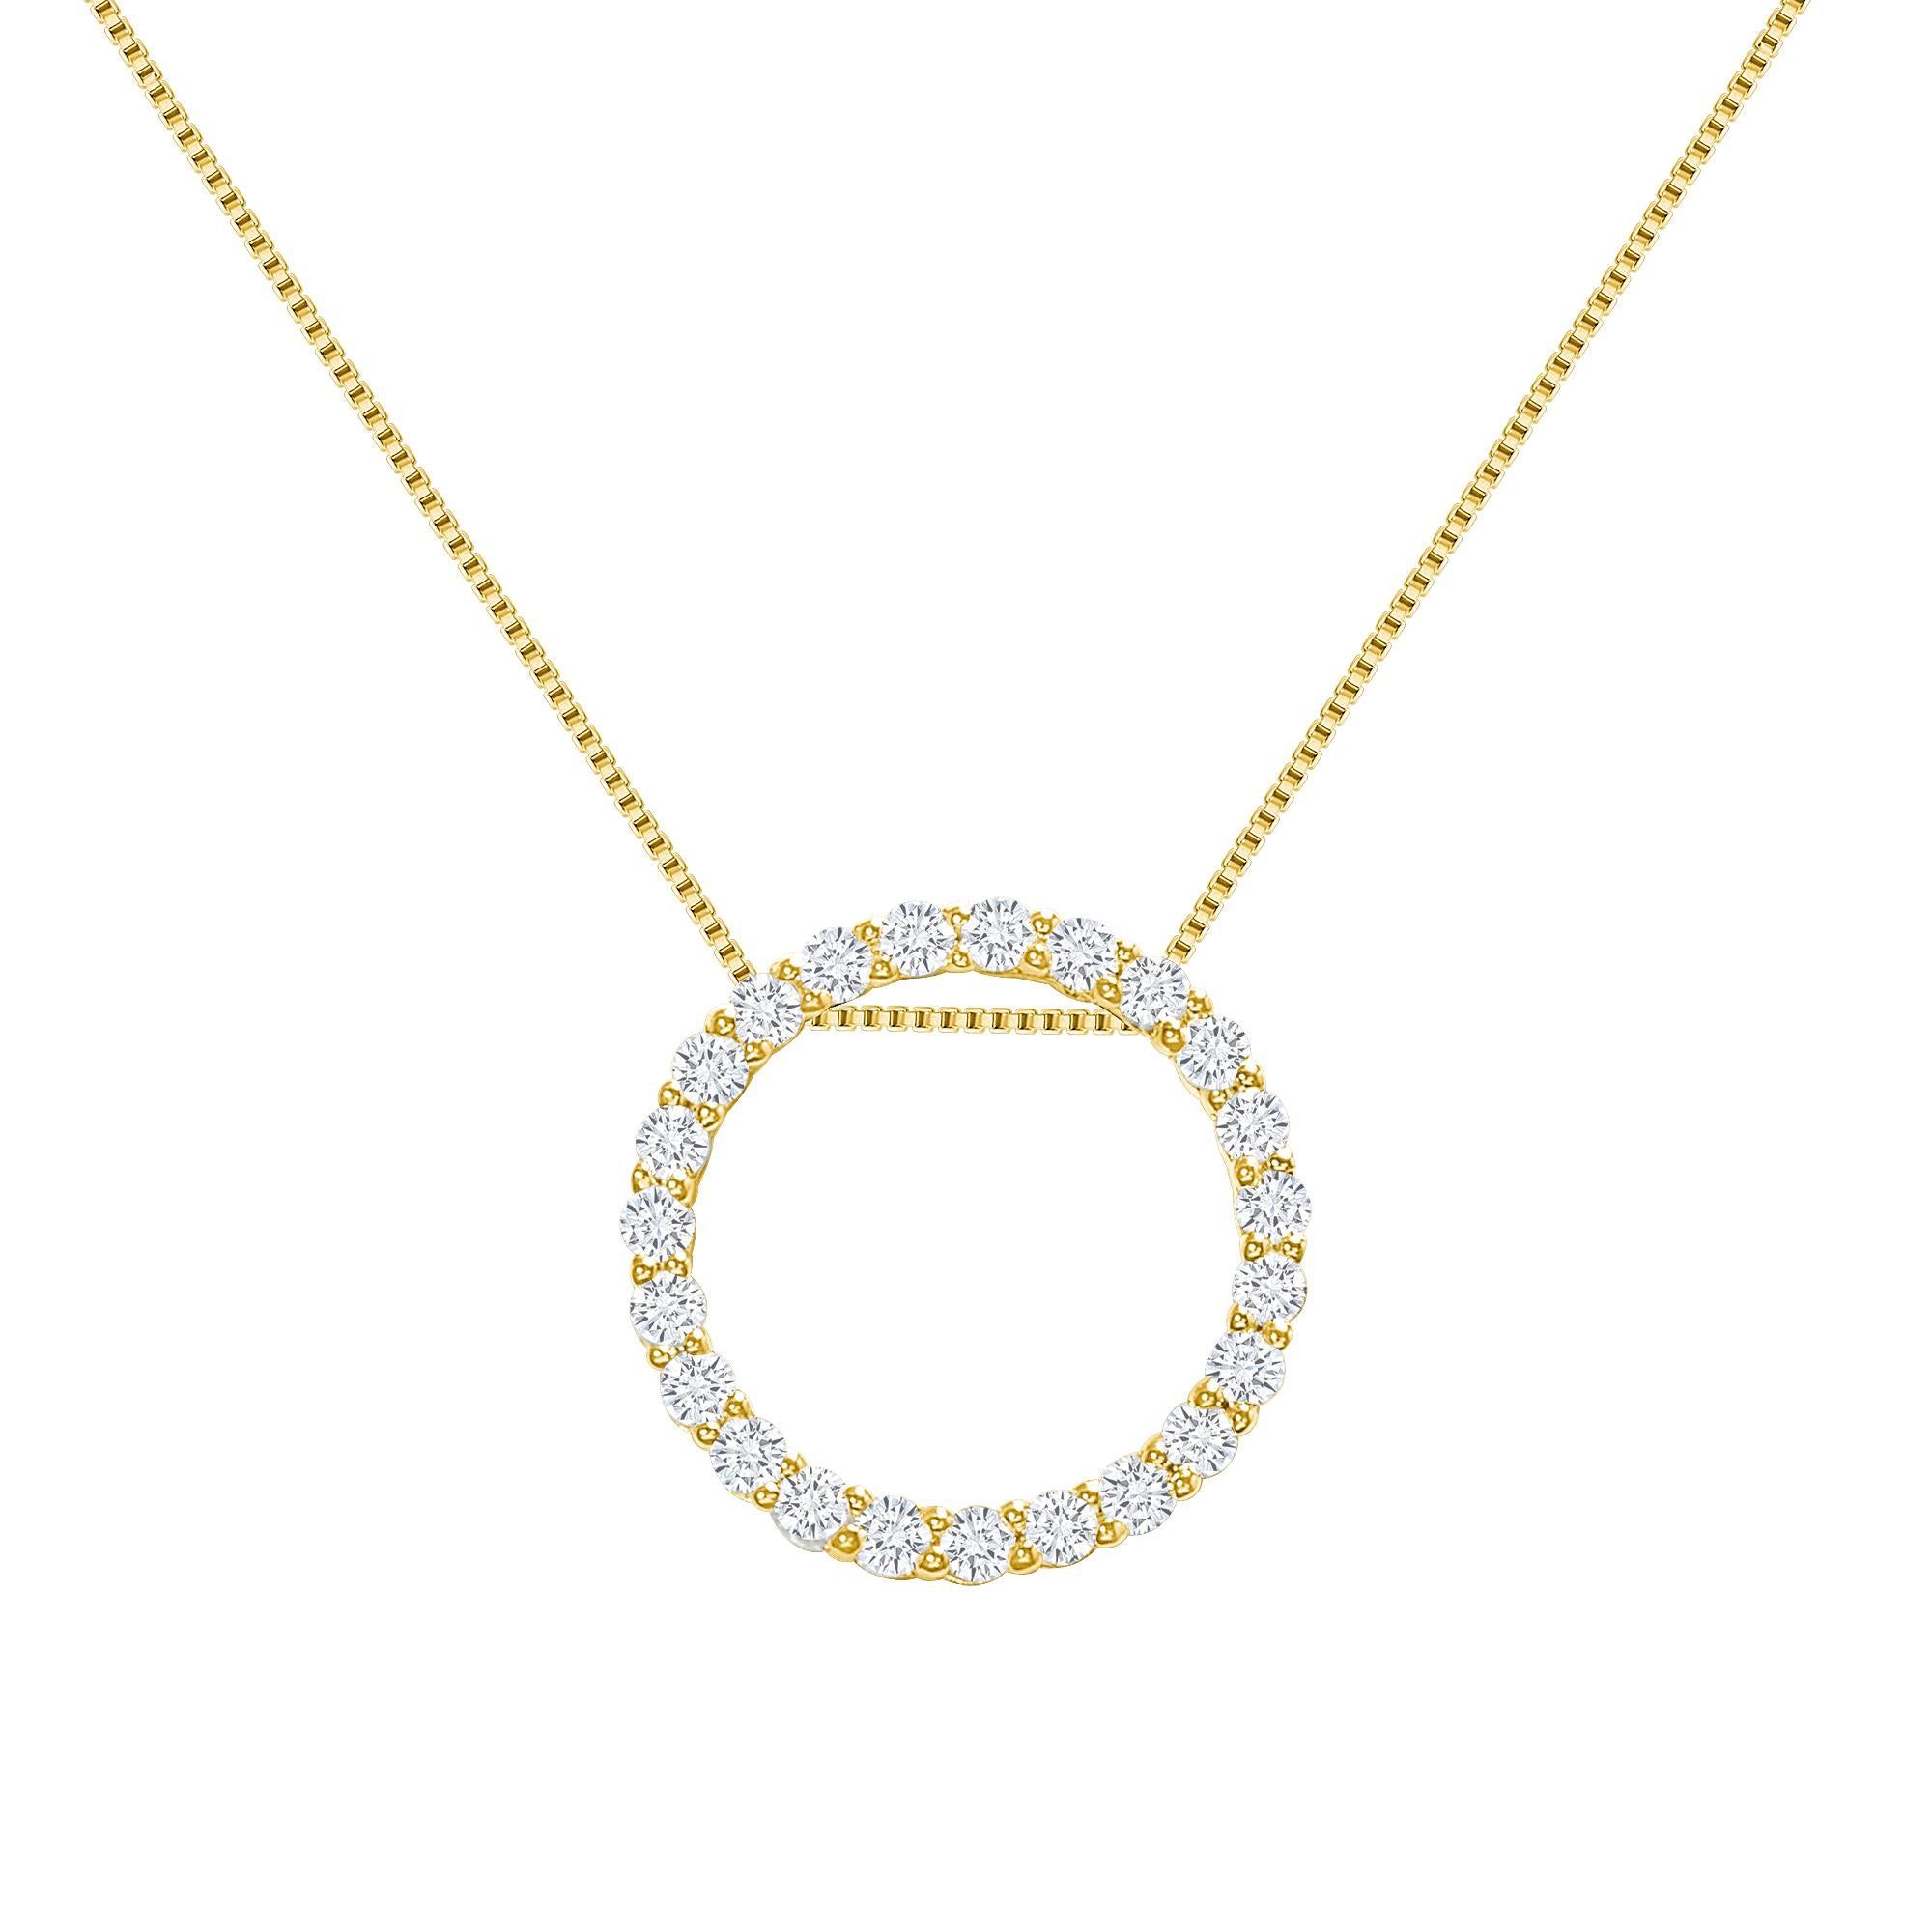 This diamond circle pendant provides a glowing chic look.
Metal: 14k Gold
Diamond Total Carats: 2 carat
Diamond Cut: Round Natural Diamonds (Not Lab Grown)
Diamond Clarity: VS
Diamond Color: F-G
Color: Yellow Gold
Necklace Length: 14 inches